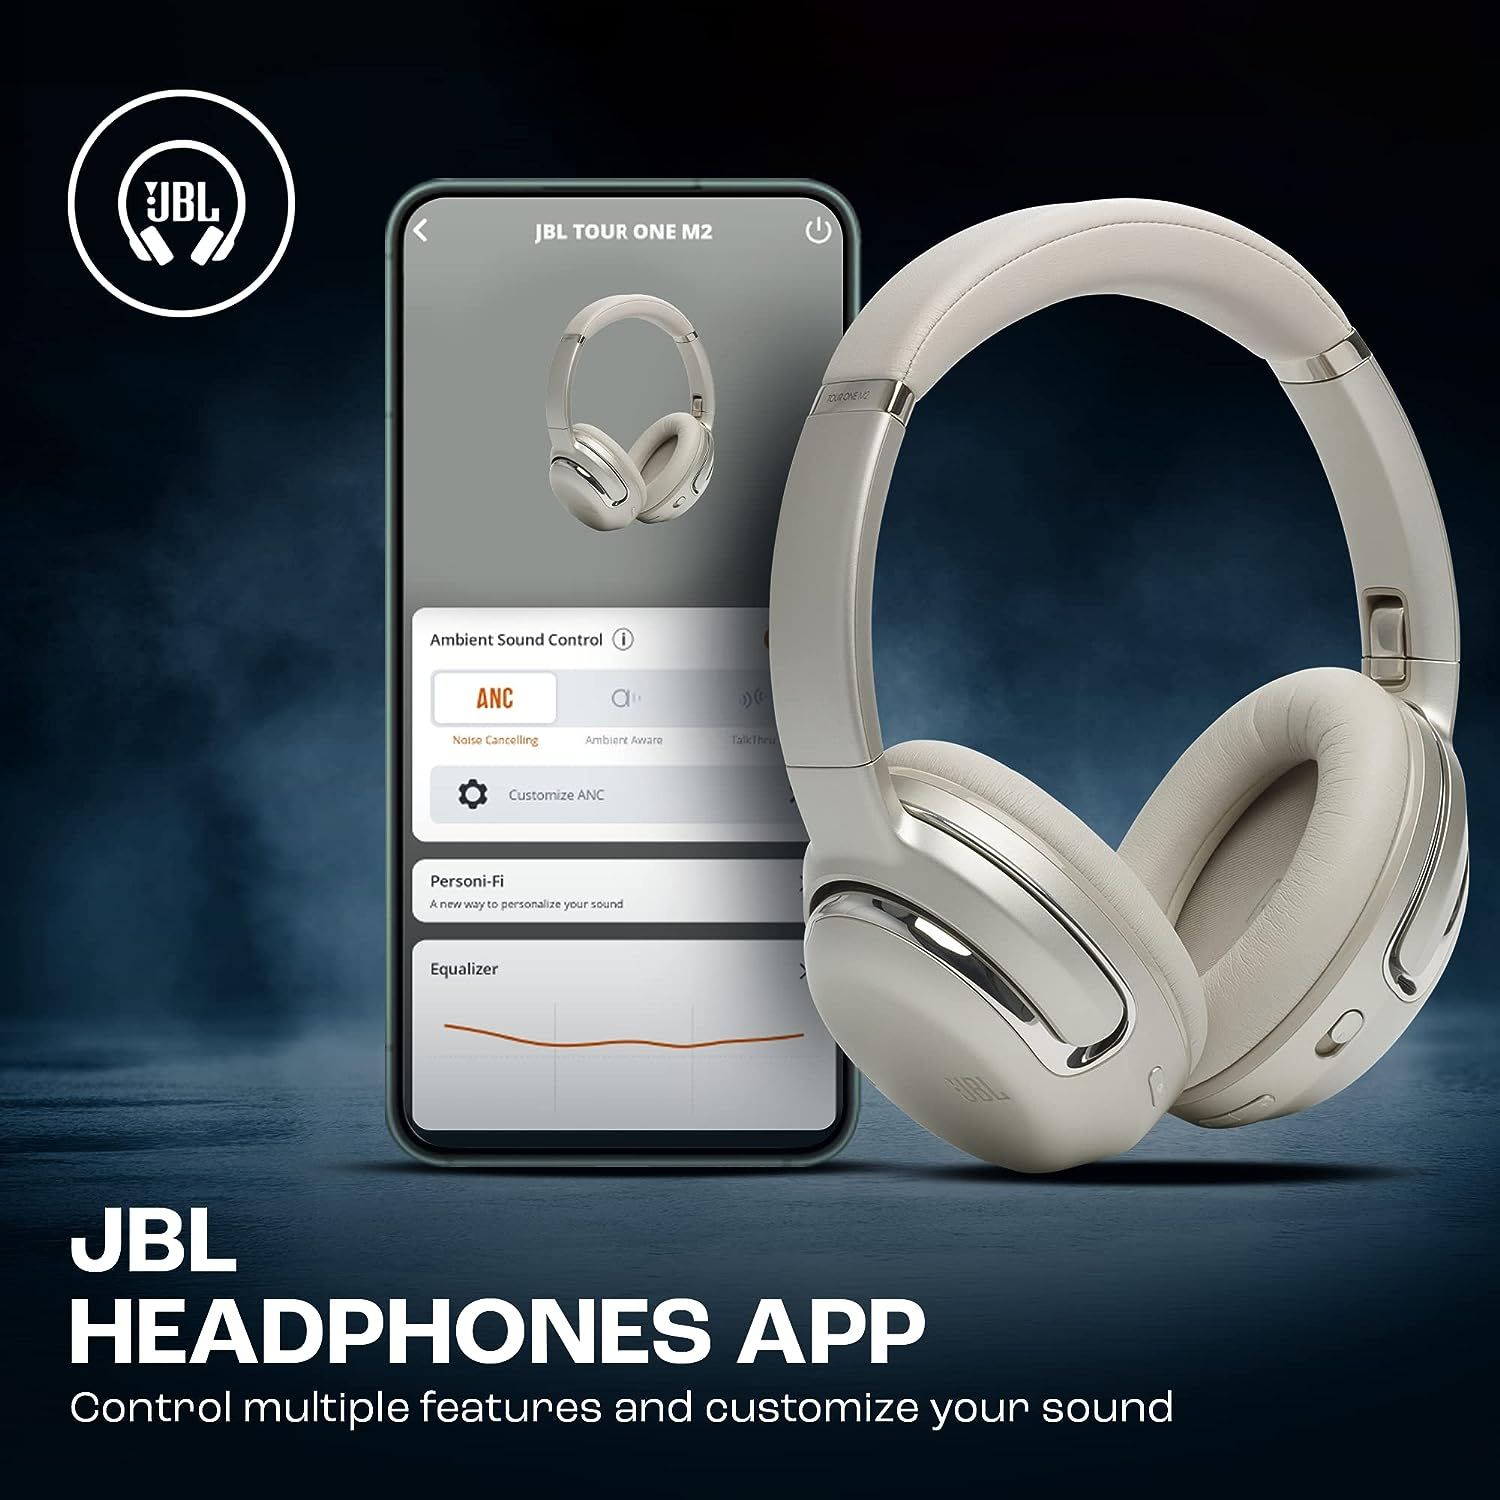 Dirhami Smart Wireless 4-Mic, Ambient, Tour ANC JBL Cancelling One - Over-Ear Noise Spatial + Immersive درهمي Sound, Personi-Fi - Pro Bluetooth 2.0, Headphones, Legendary M2 Sound,